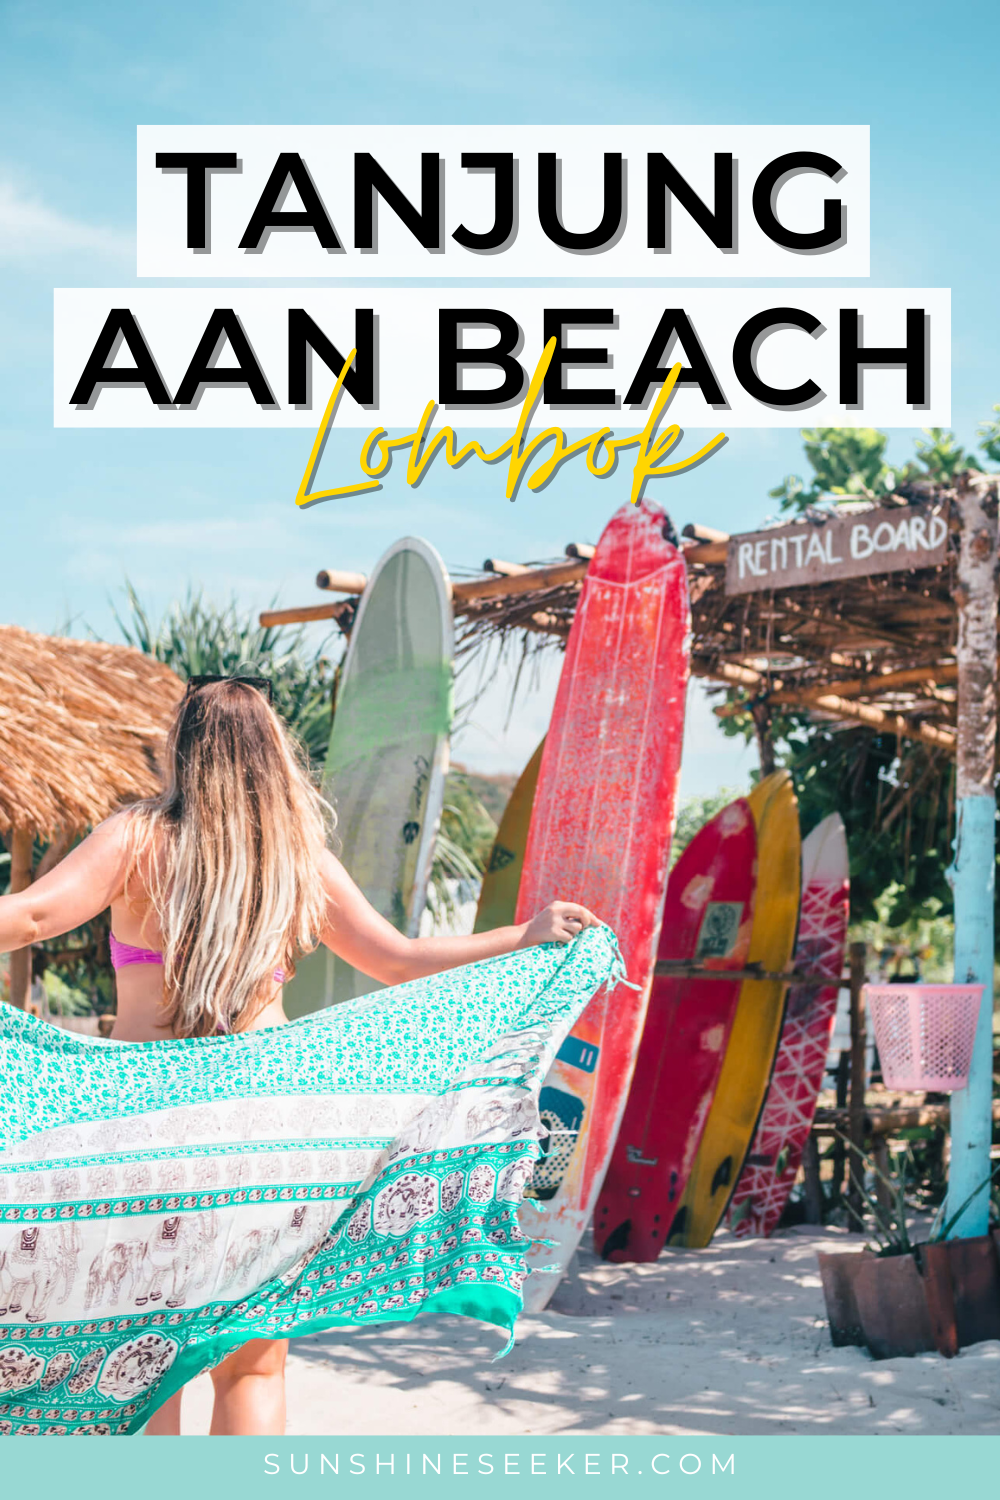 Looking for the best beach in Lombok? Then you should head to Tanjung Aan, a large white sandy cove lined by palm trees. Discover how to get to Tanjung Aan, what to expect and all the best things to do. You don't want to miss this paradise beach!